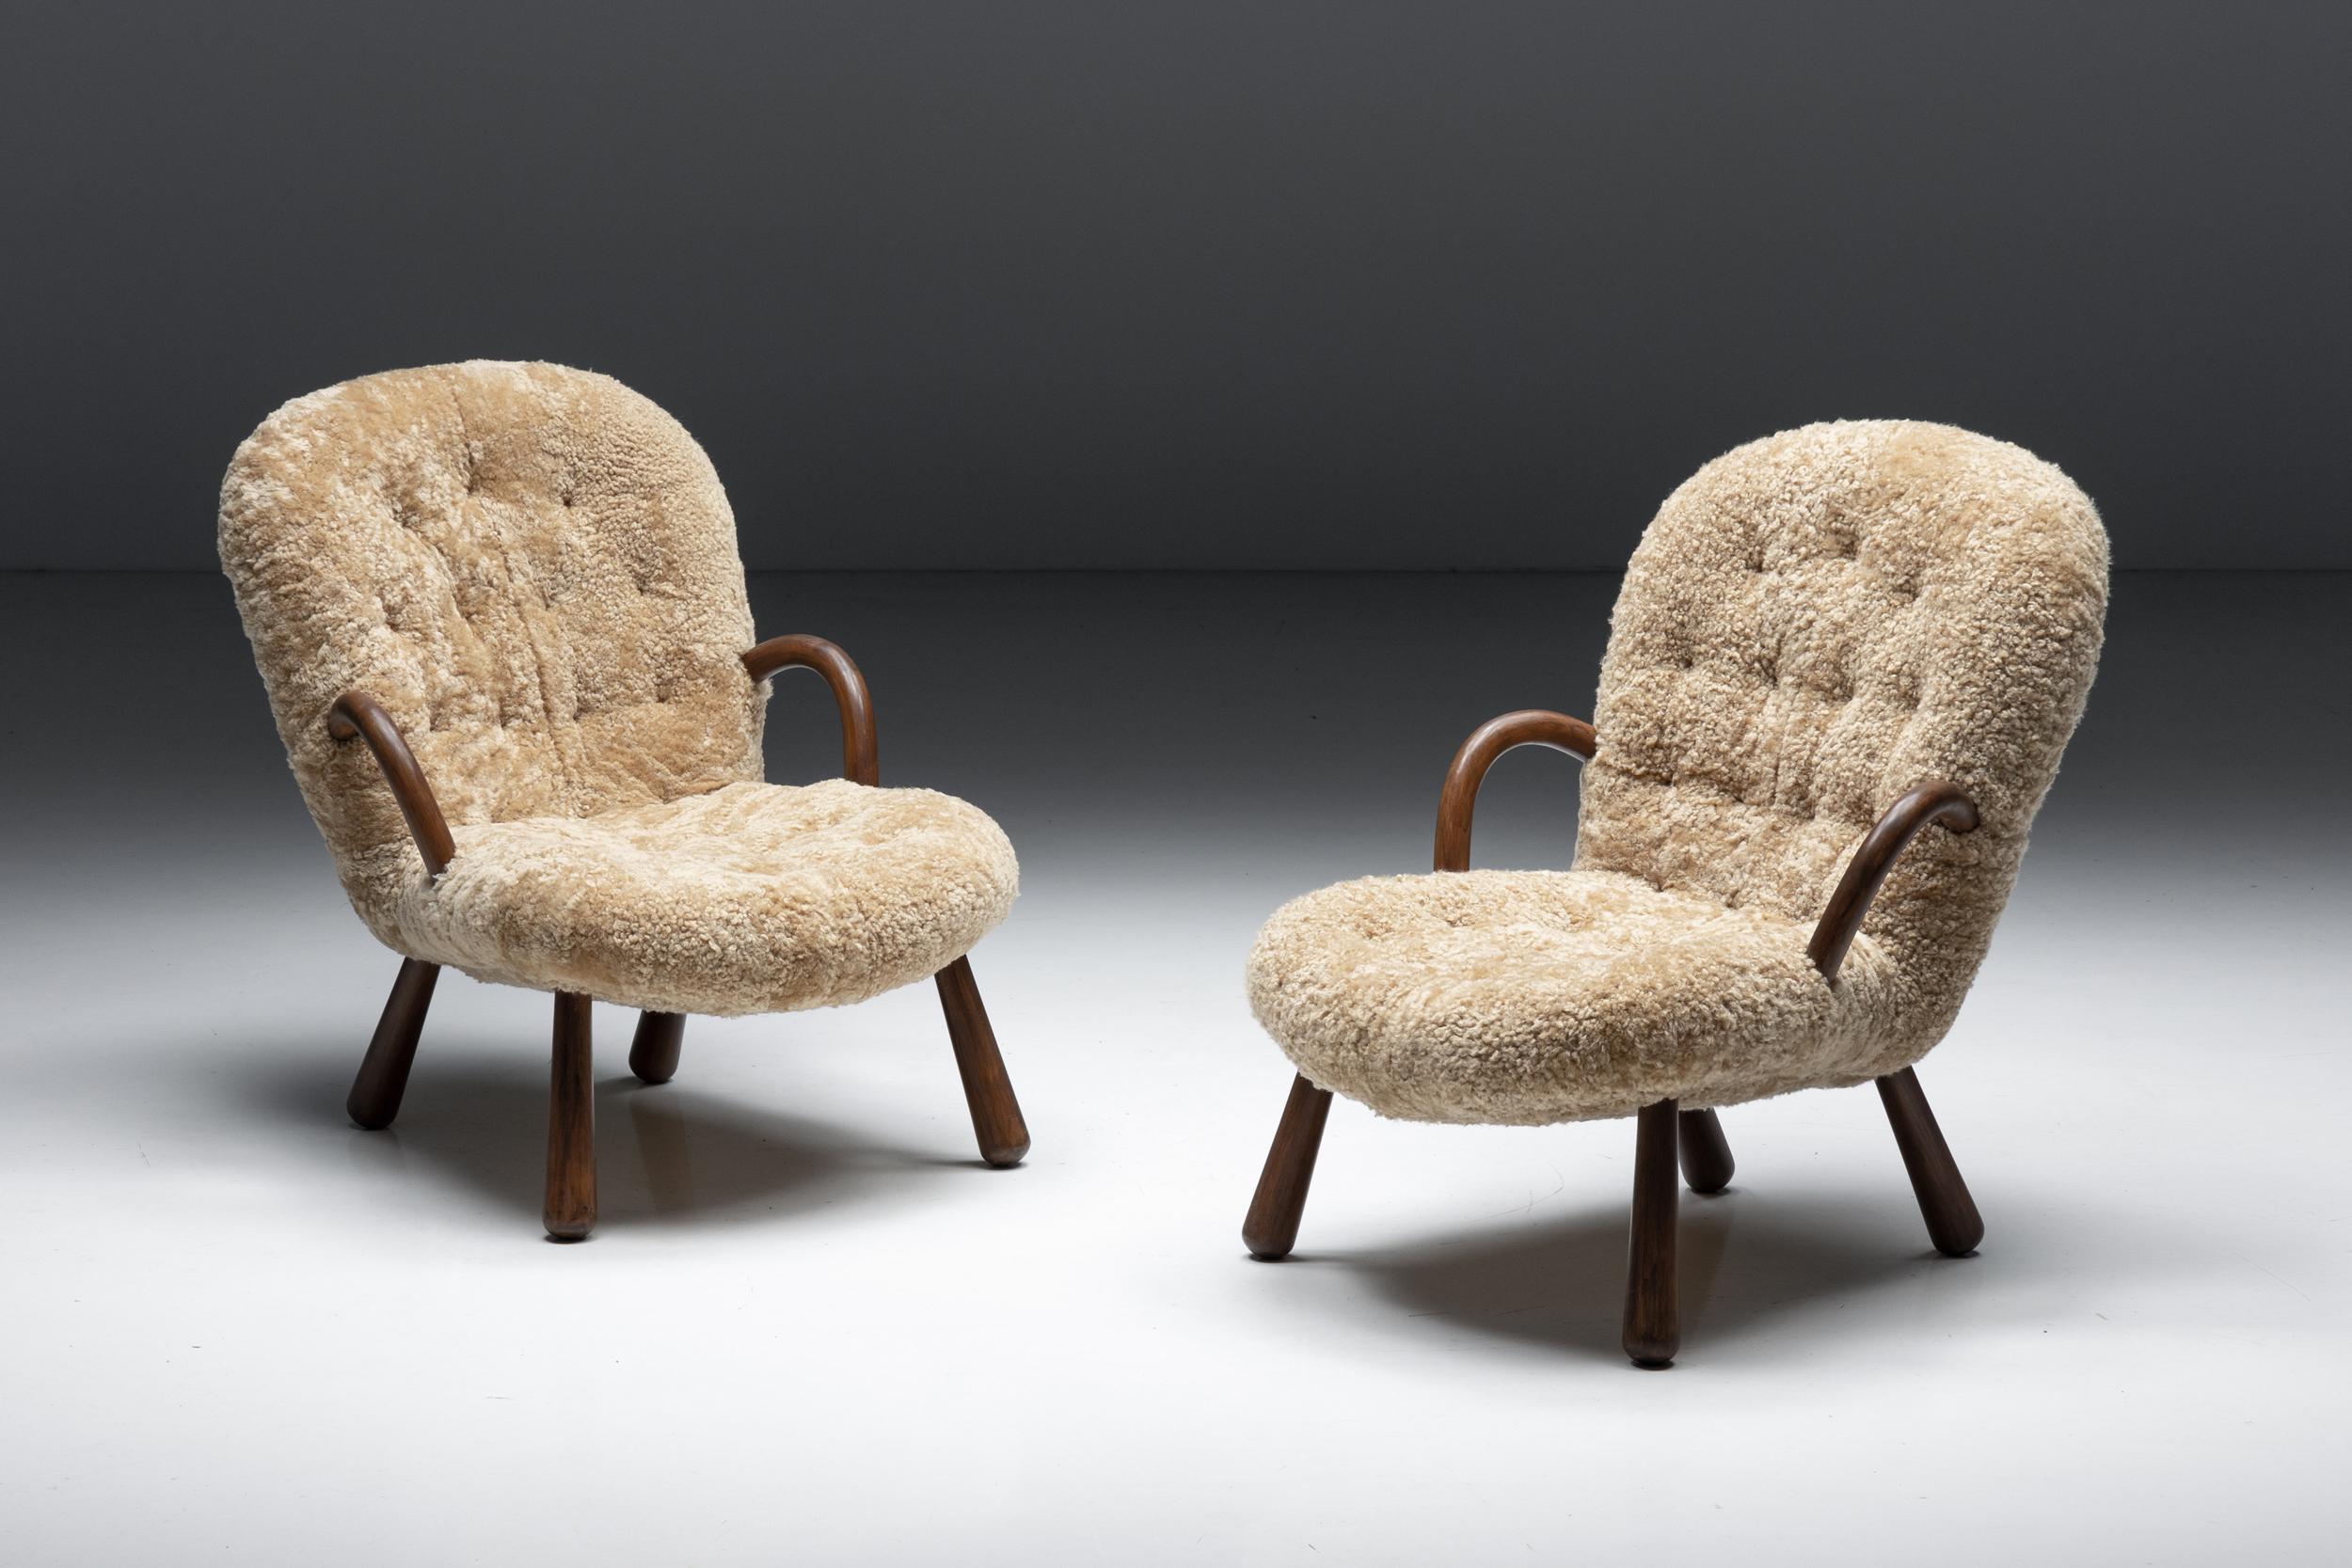 Arctander clam chair; Sheepskin; Philip Arctander; Denmark; 1944; Danish Design; Muslingestol; Scandinavian Design; 

The Arctander clam chair, also known as the “Muslingestol”, is easily recognizable by its rounded arms, club-shaped legs, and